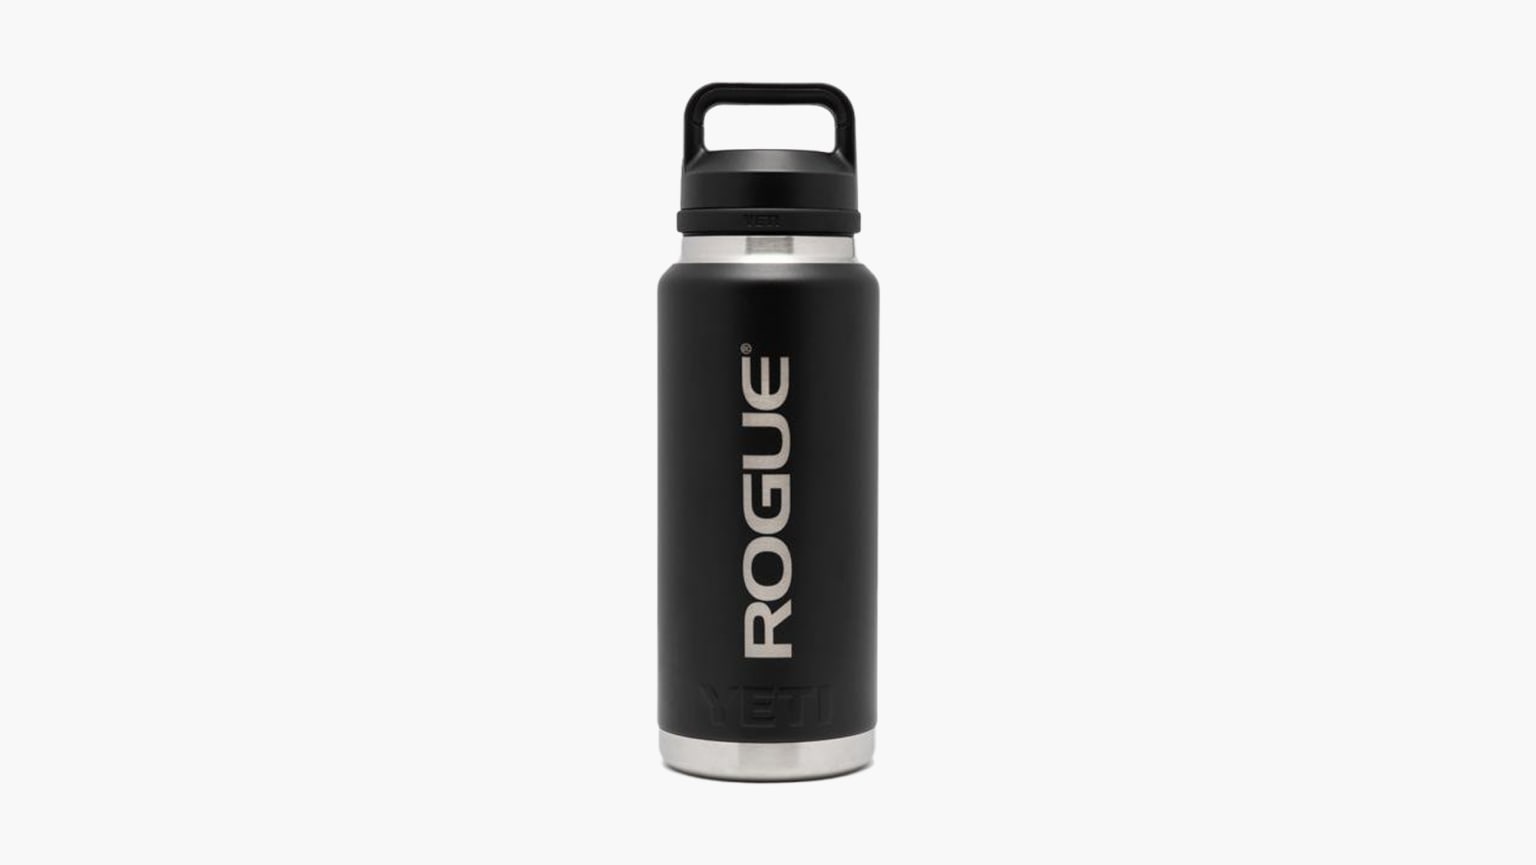 https://assets.roguefitness.com/f_auto,q_auto,c_limit,w_1536,b_rgb:f8f8f8/catalog/Gear%20and%20Accessories/Accessories/Shakers%20and%20Bottles/YT0052/YT0052-H_jpclzb.png